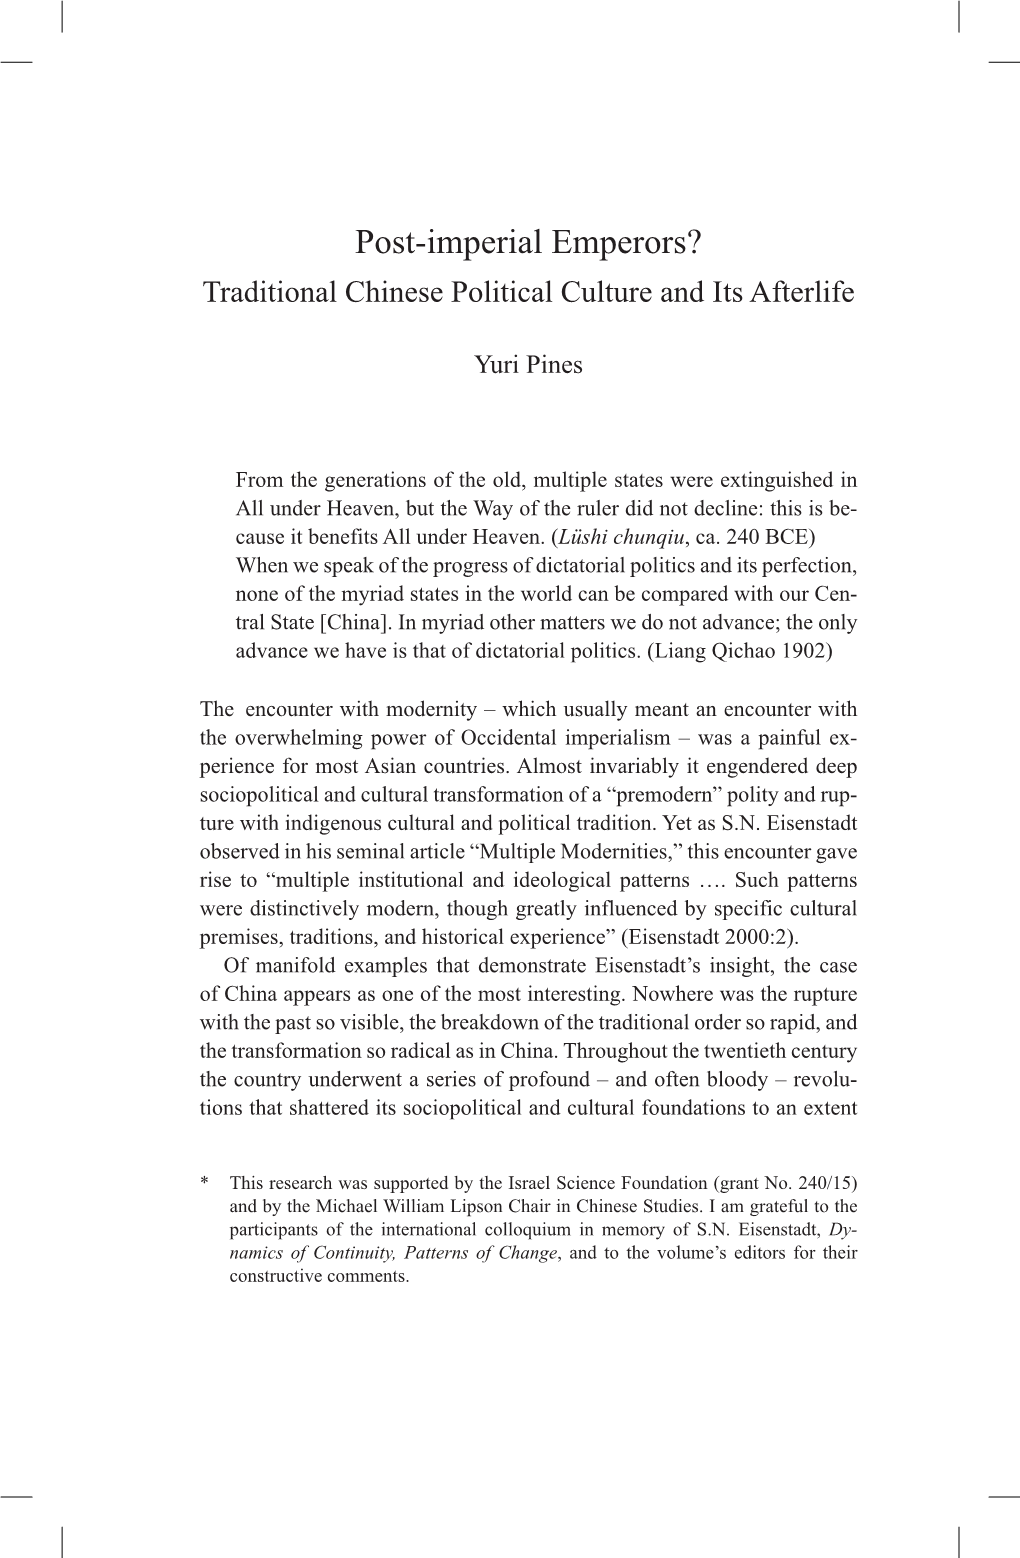 Post-Imperial Emperors? Traditional Chinese Political Culture and Its Afterlife